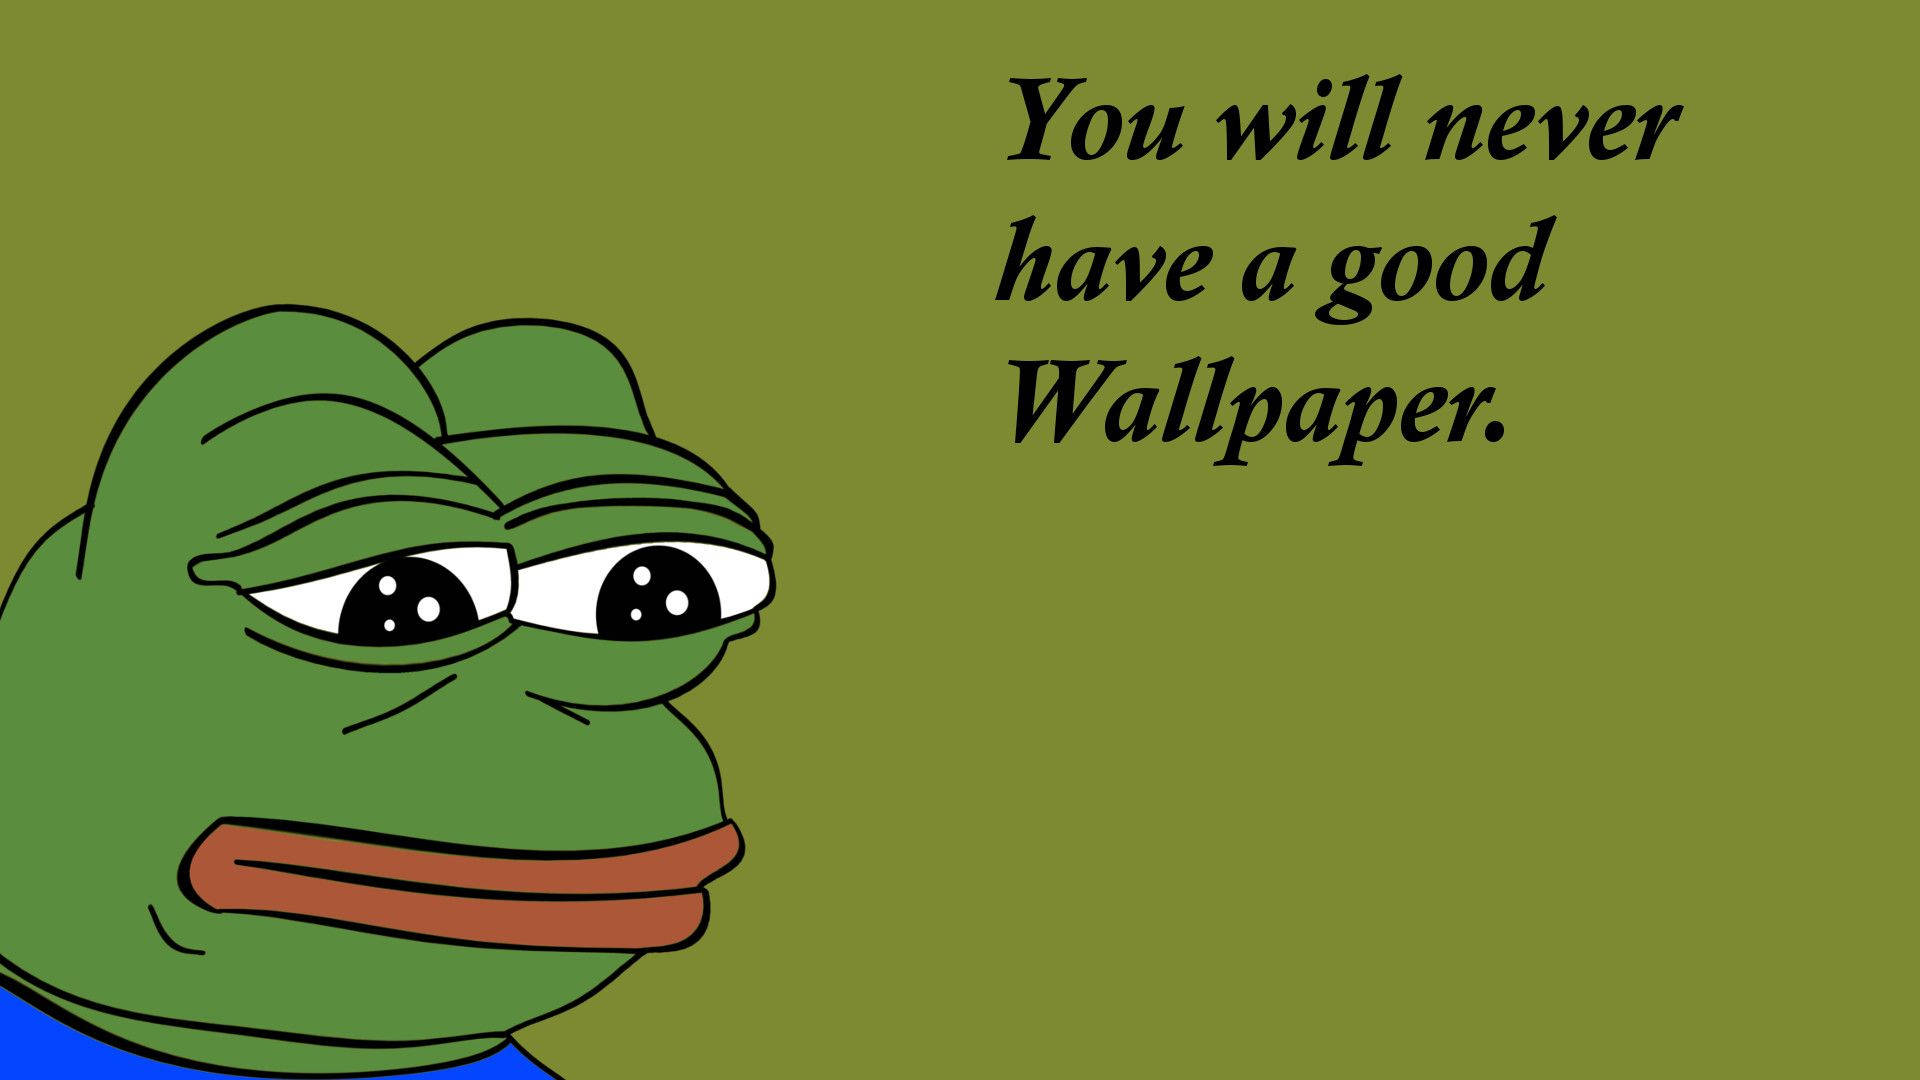 Sad frog meme with teary eyes that says 